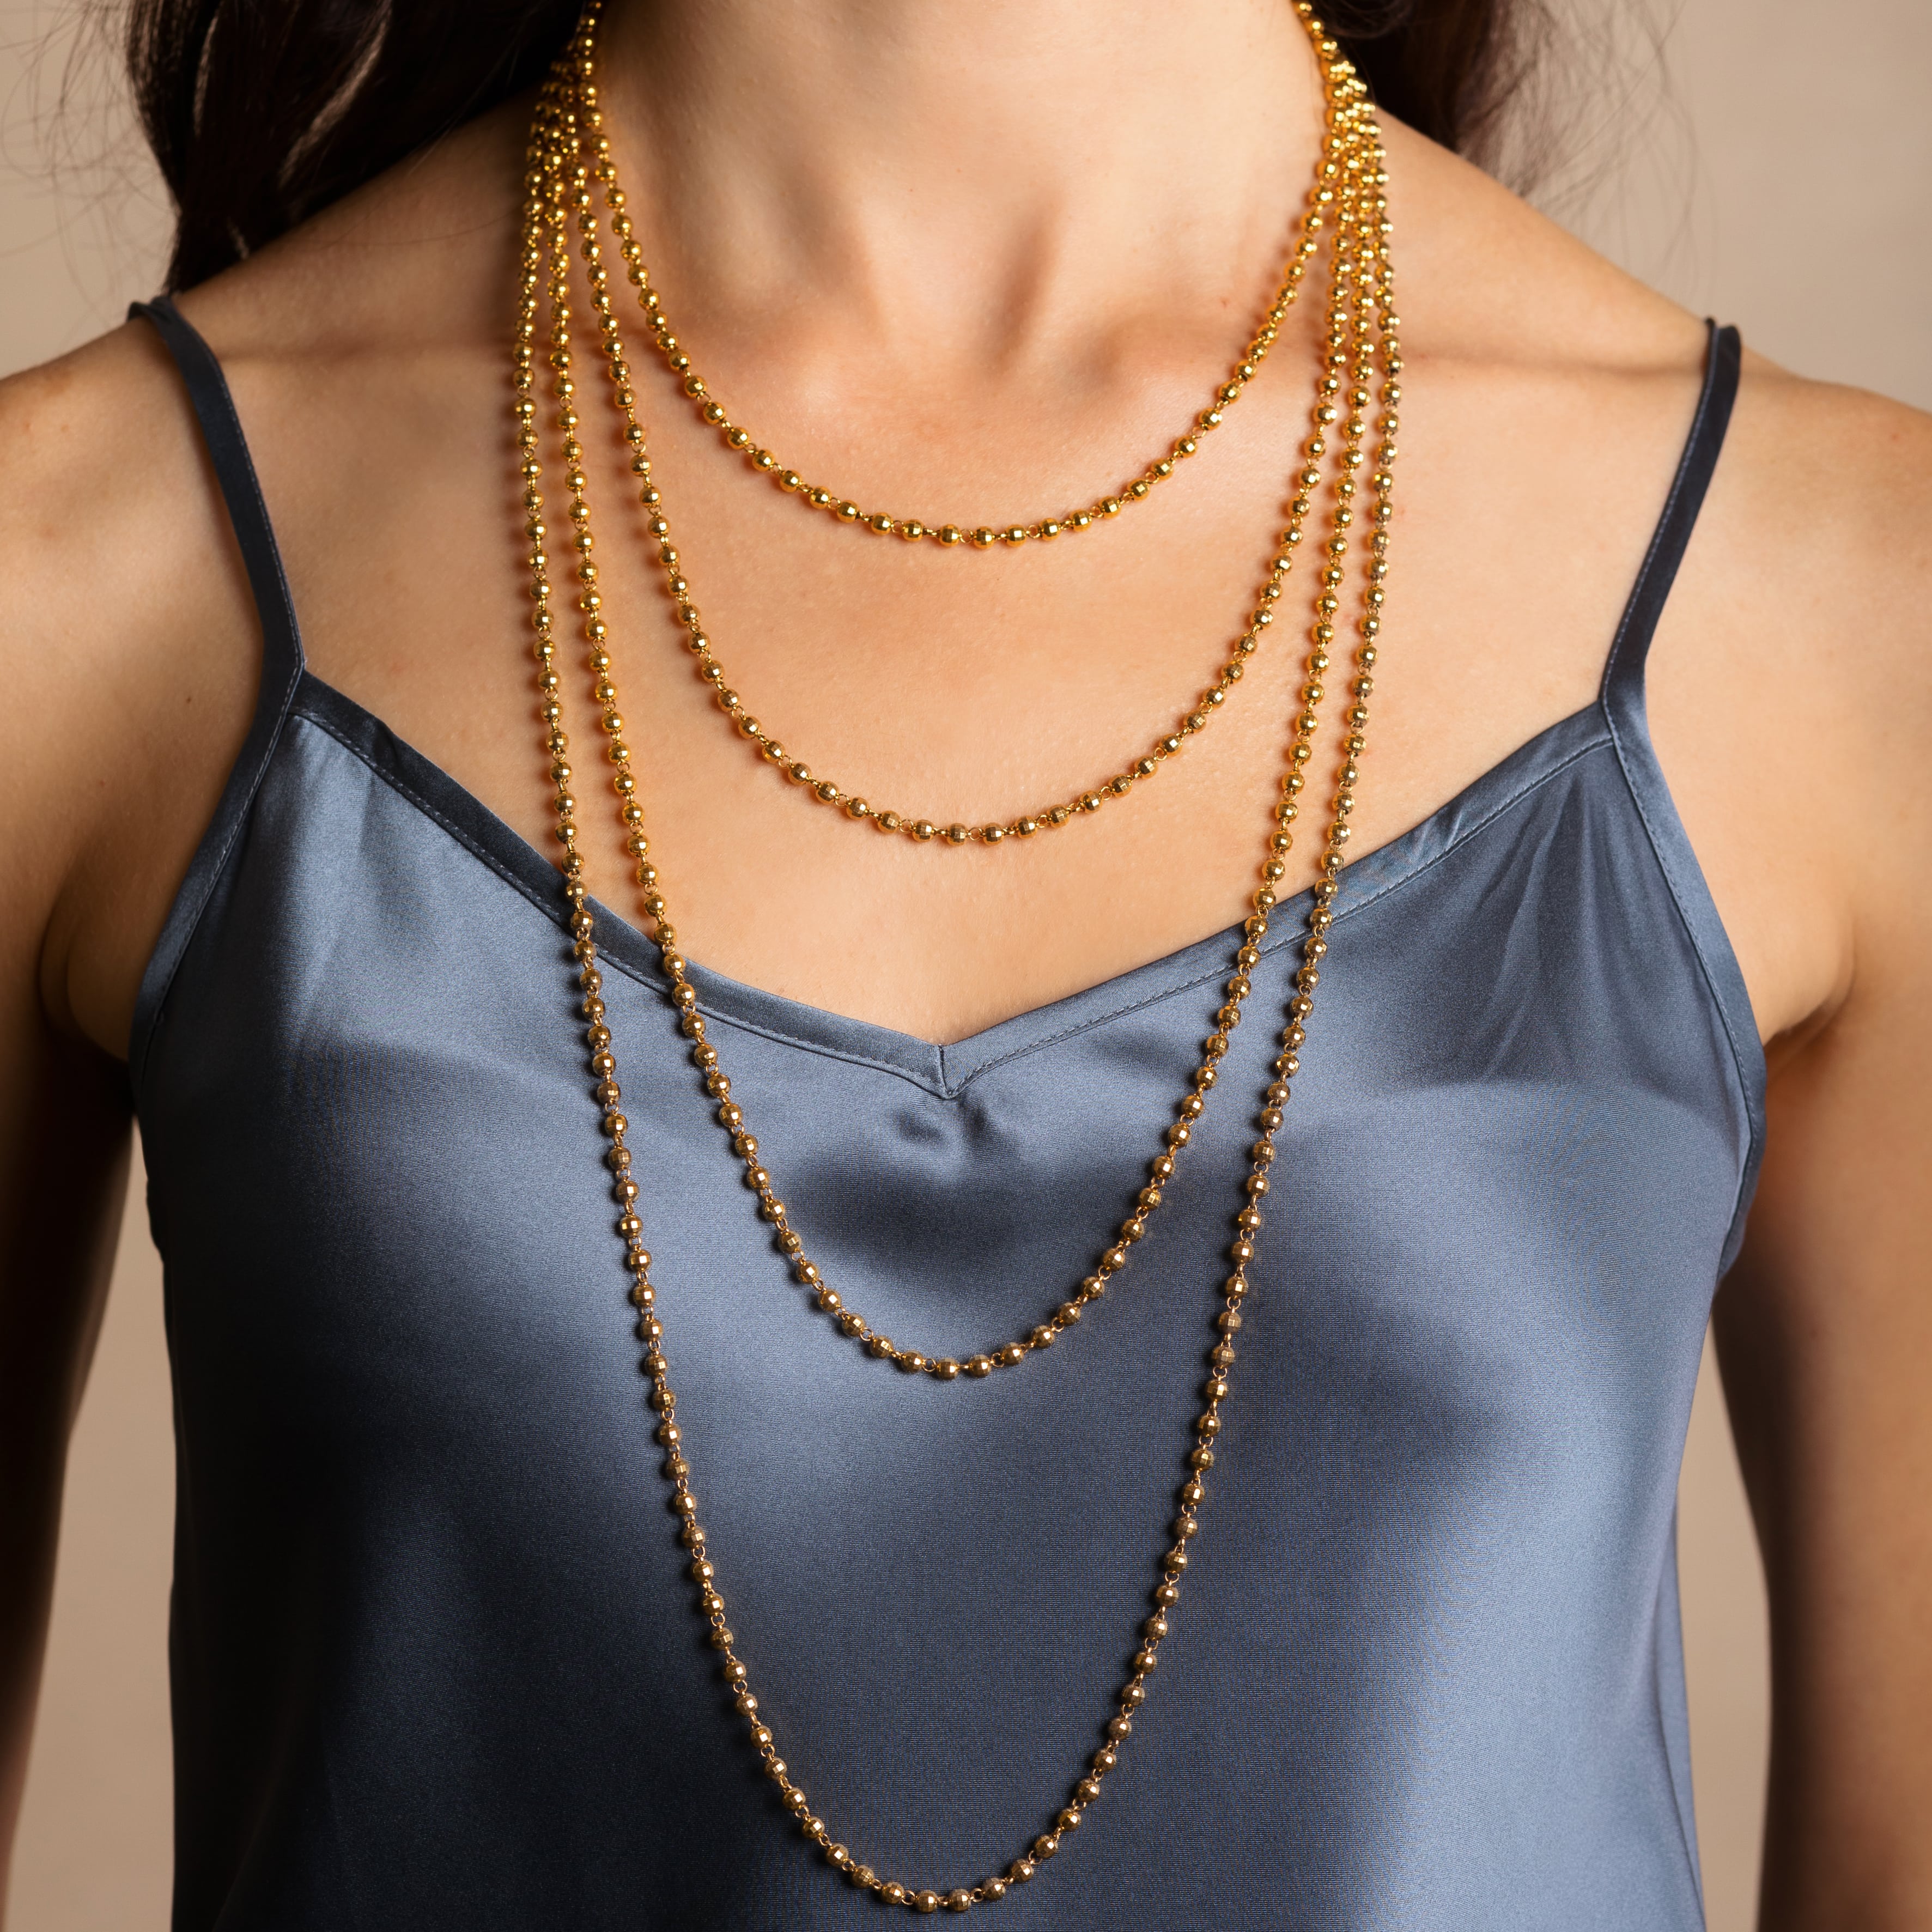 Diamond Beads Necklace in Gold